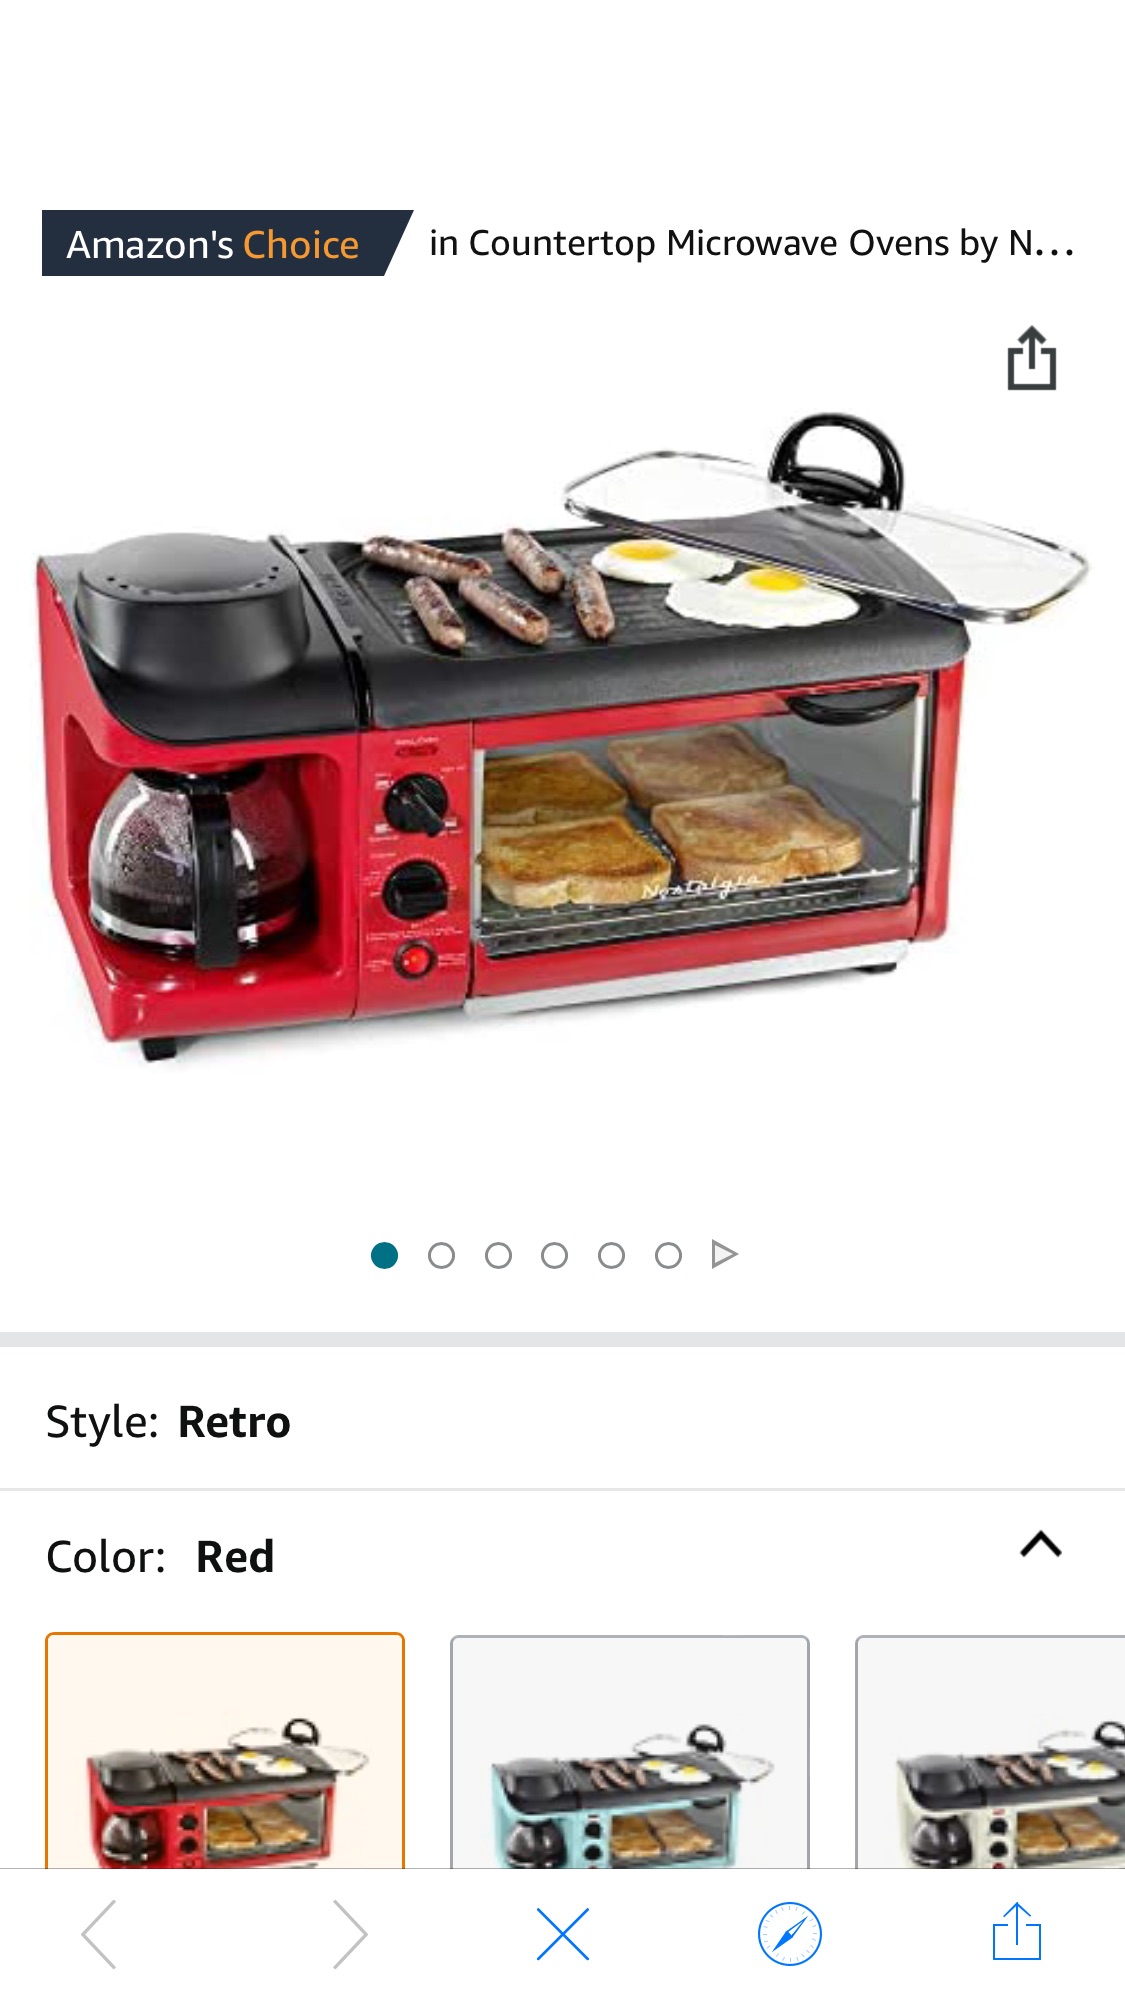 Nostalgia Retro 3-in-1 Family Size Electric Breakfast Station, Non Stick Die Cast Grill/Griddle, 4 Slice Toaster Oven, Coffee Maker, Red 早餐机